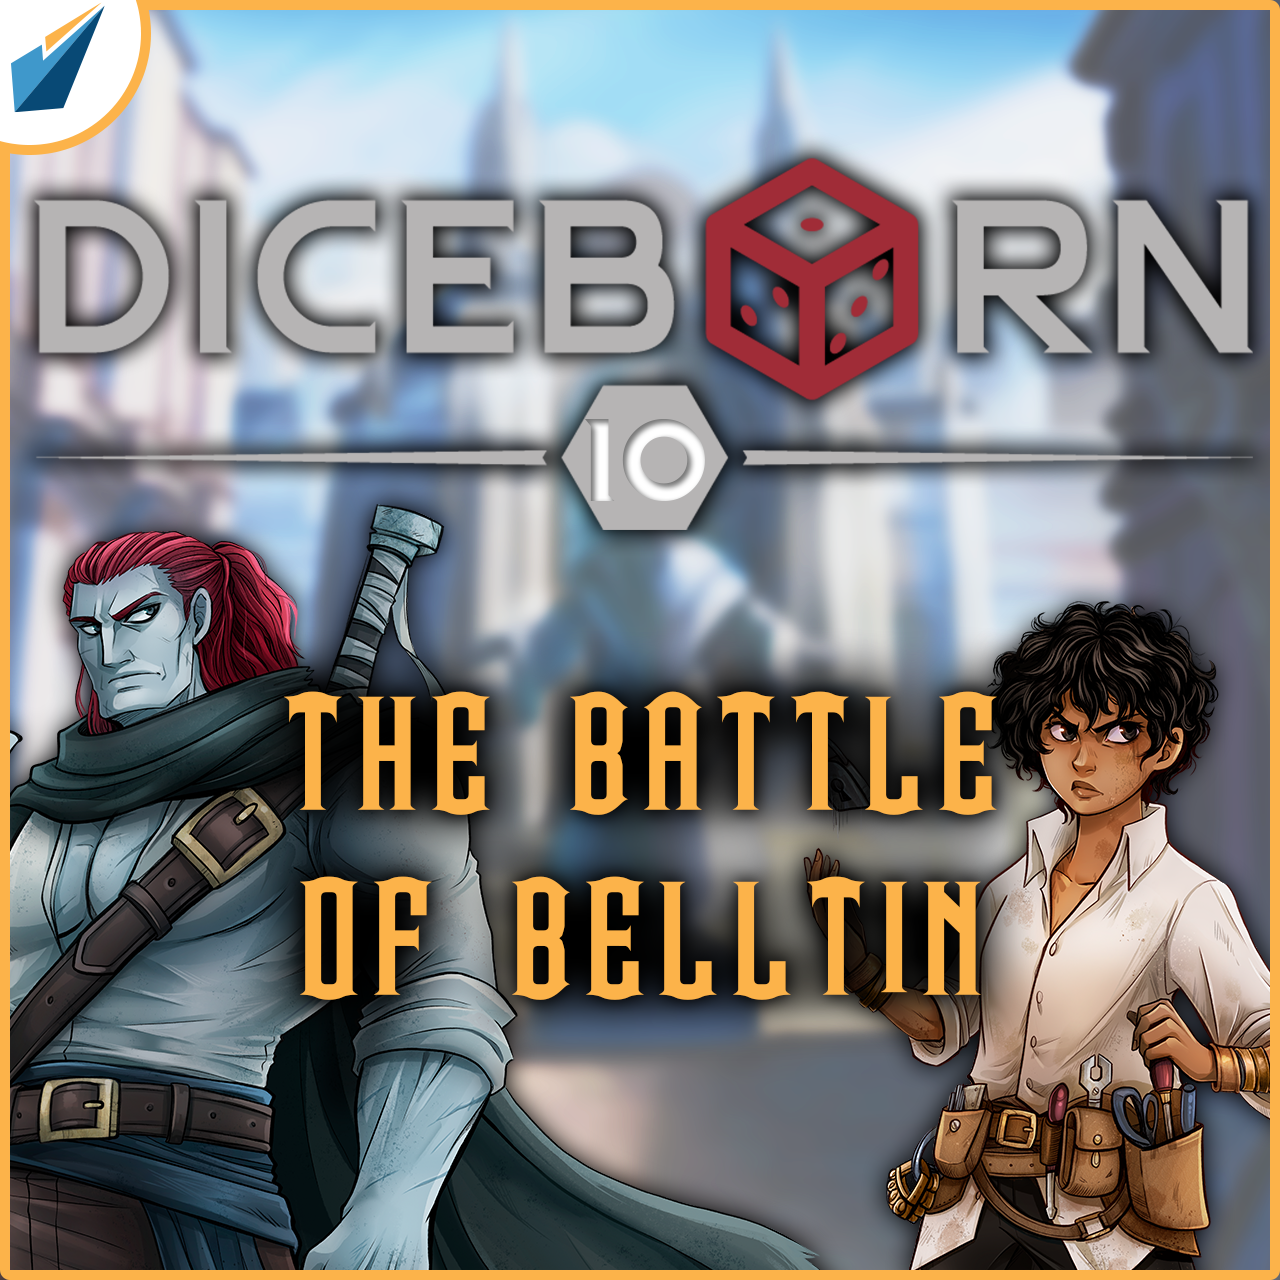 More information about "Diceborn: Episode 10 - The Battle of Belltin"